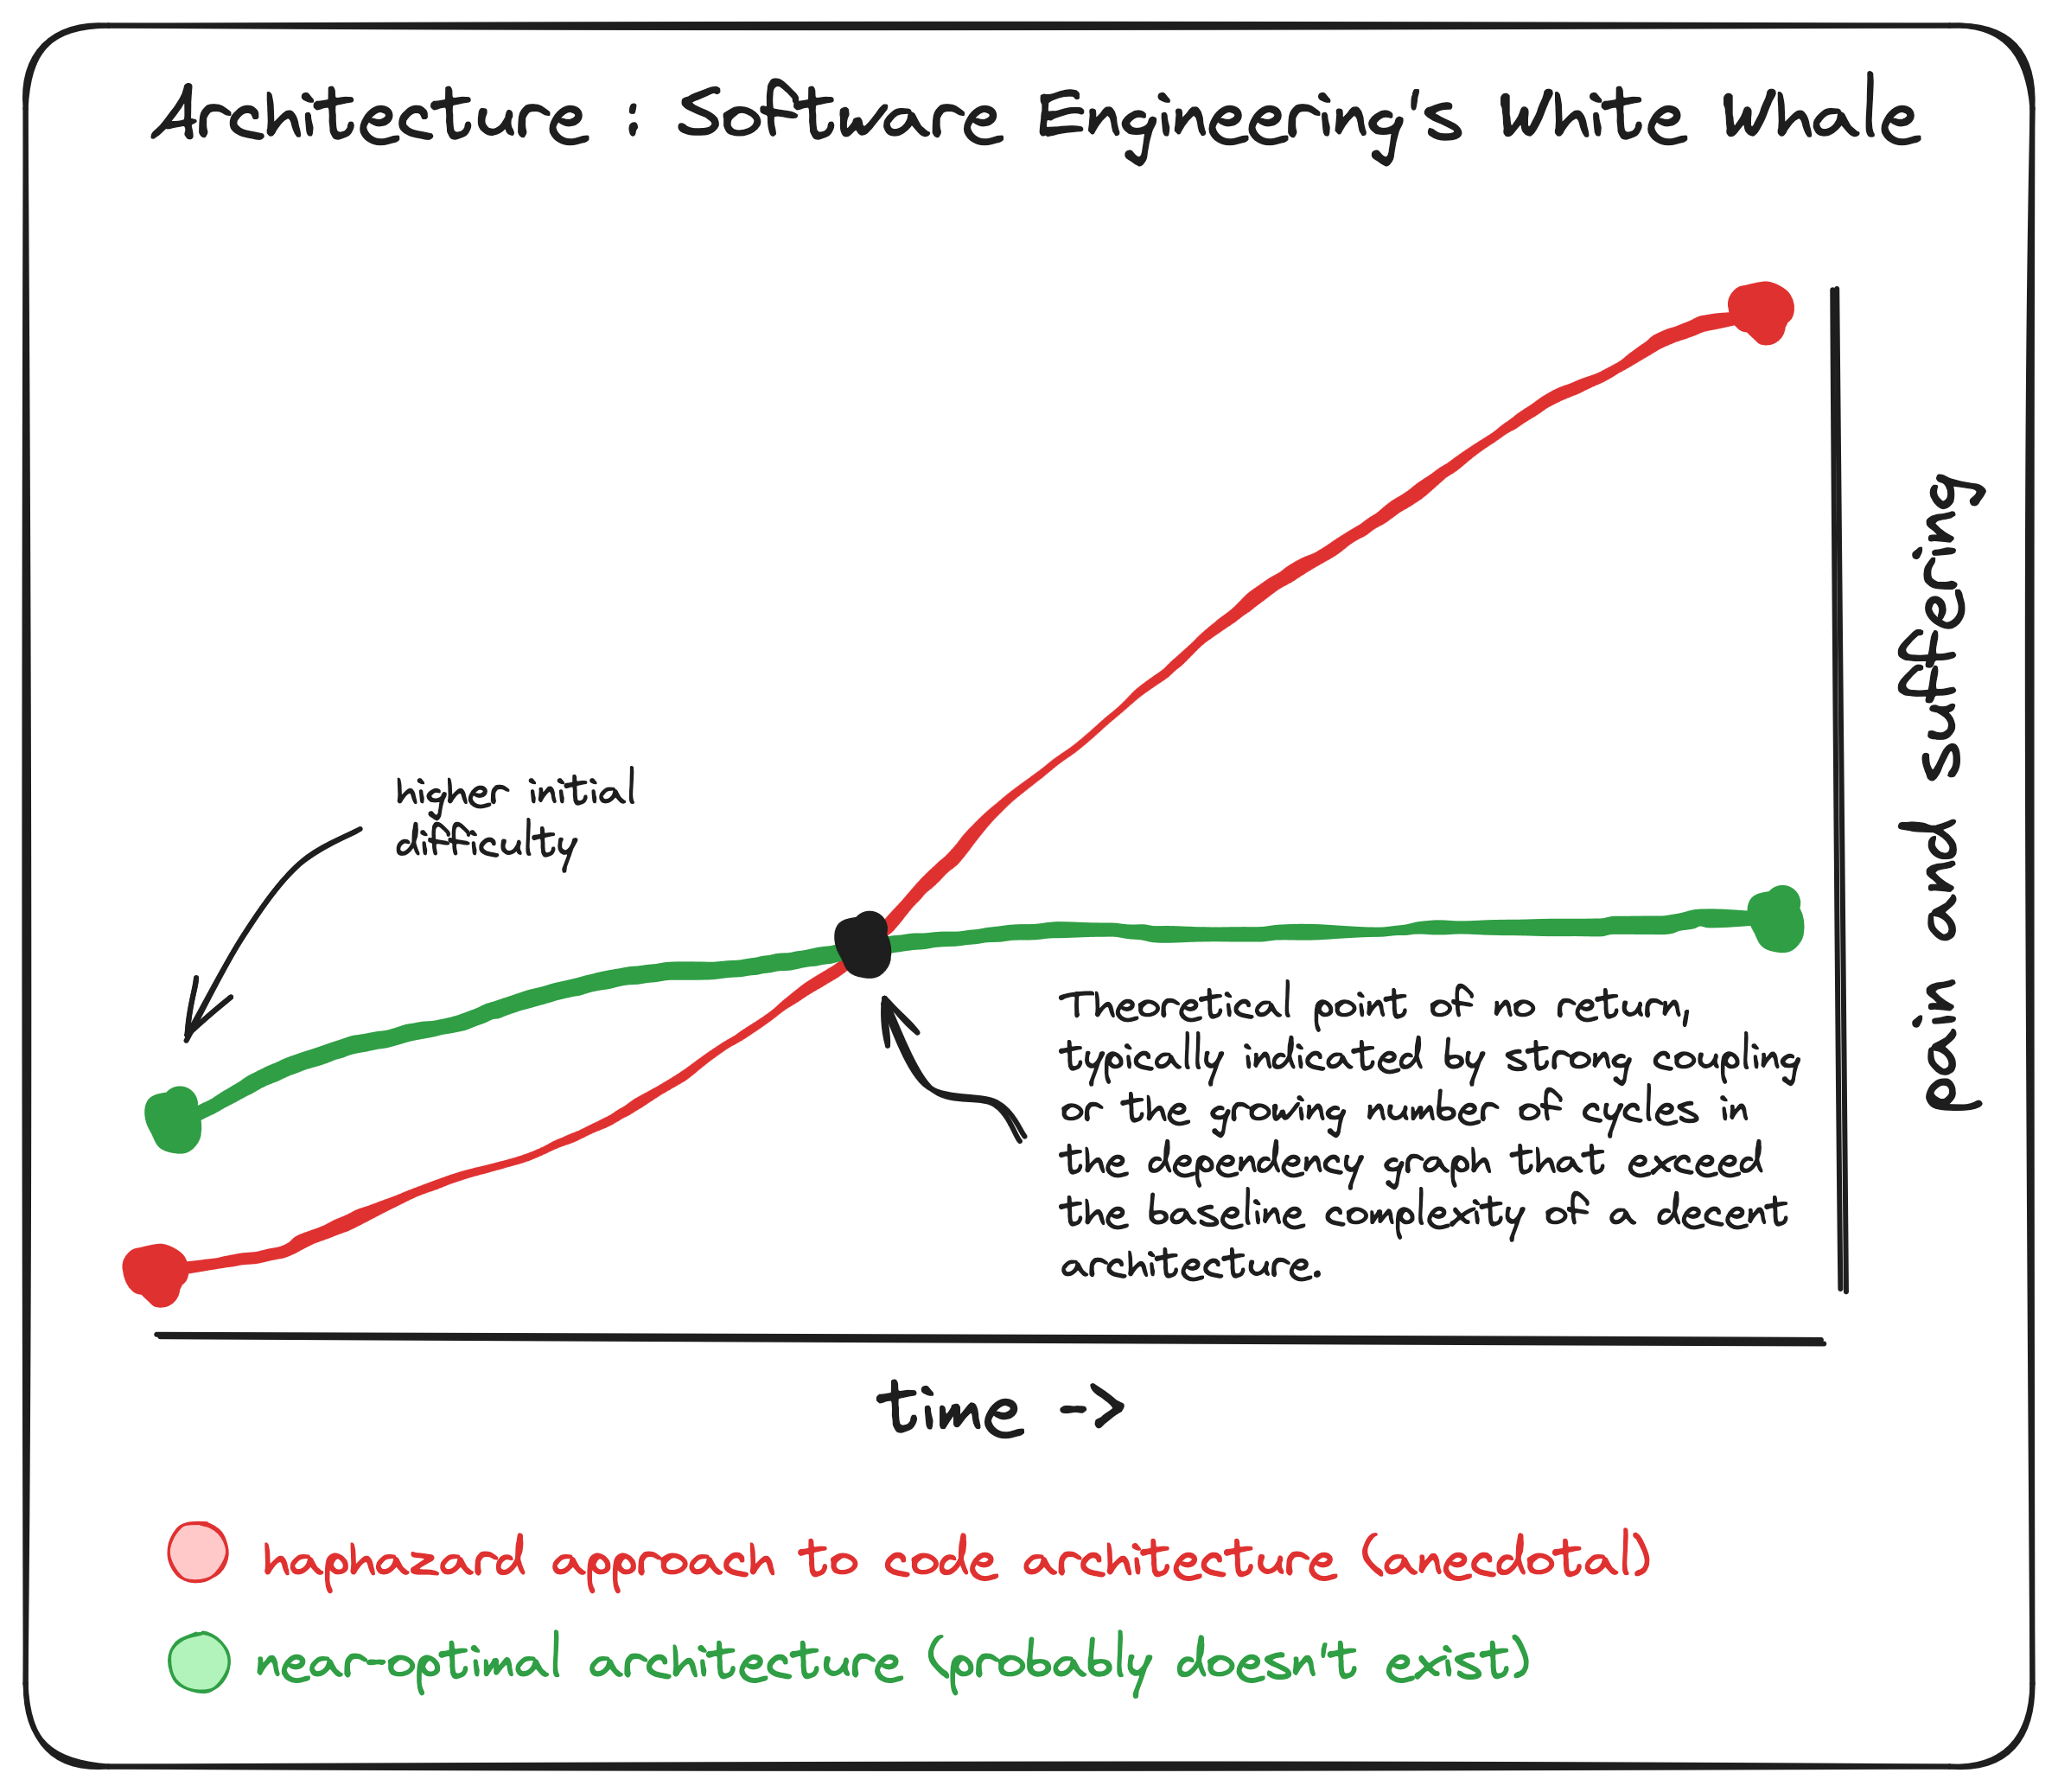 Architecture: software engineering's white whale.